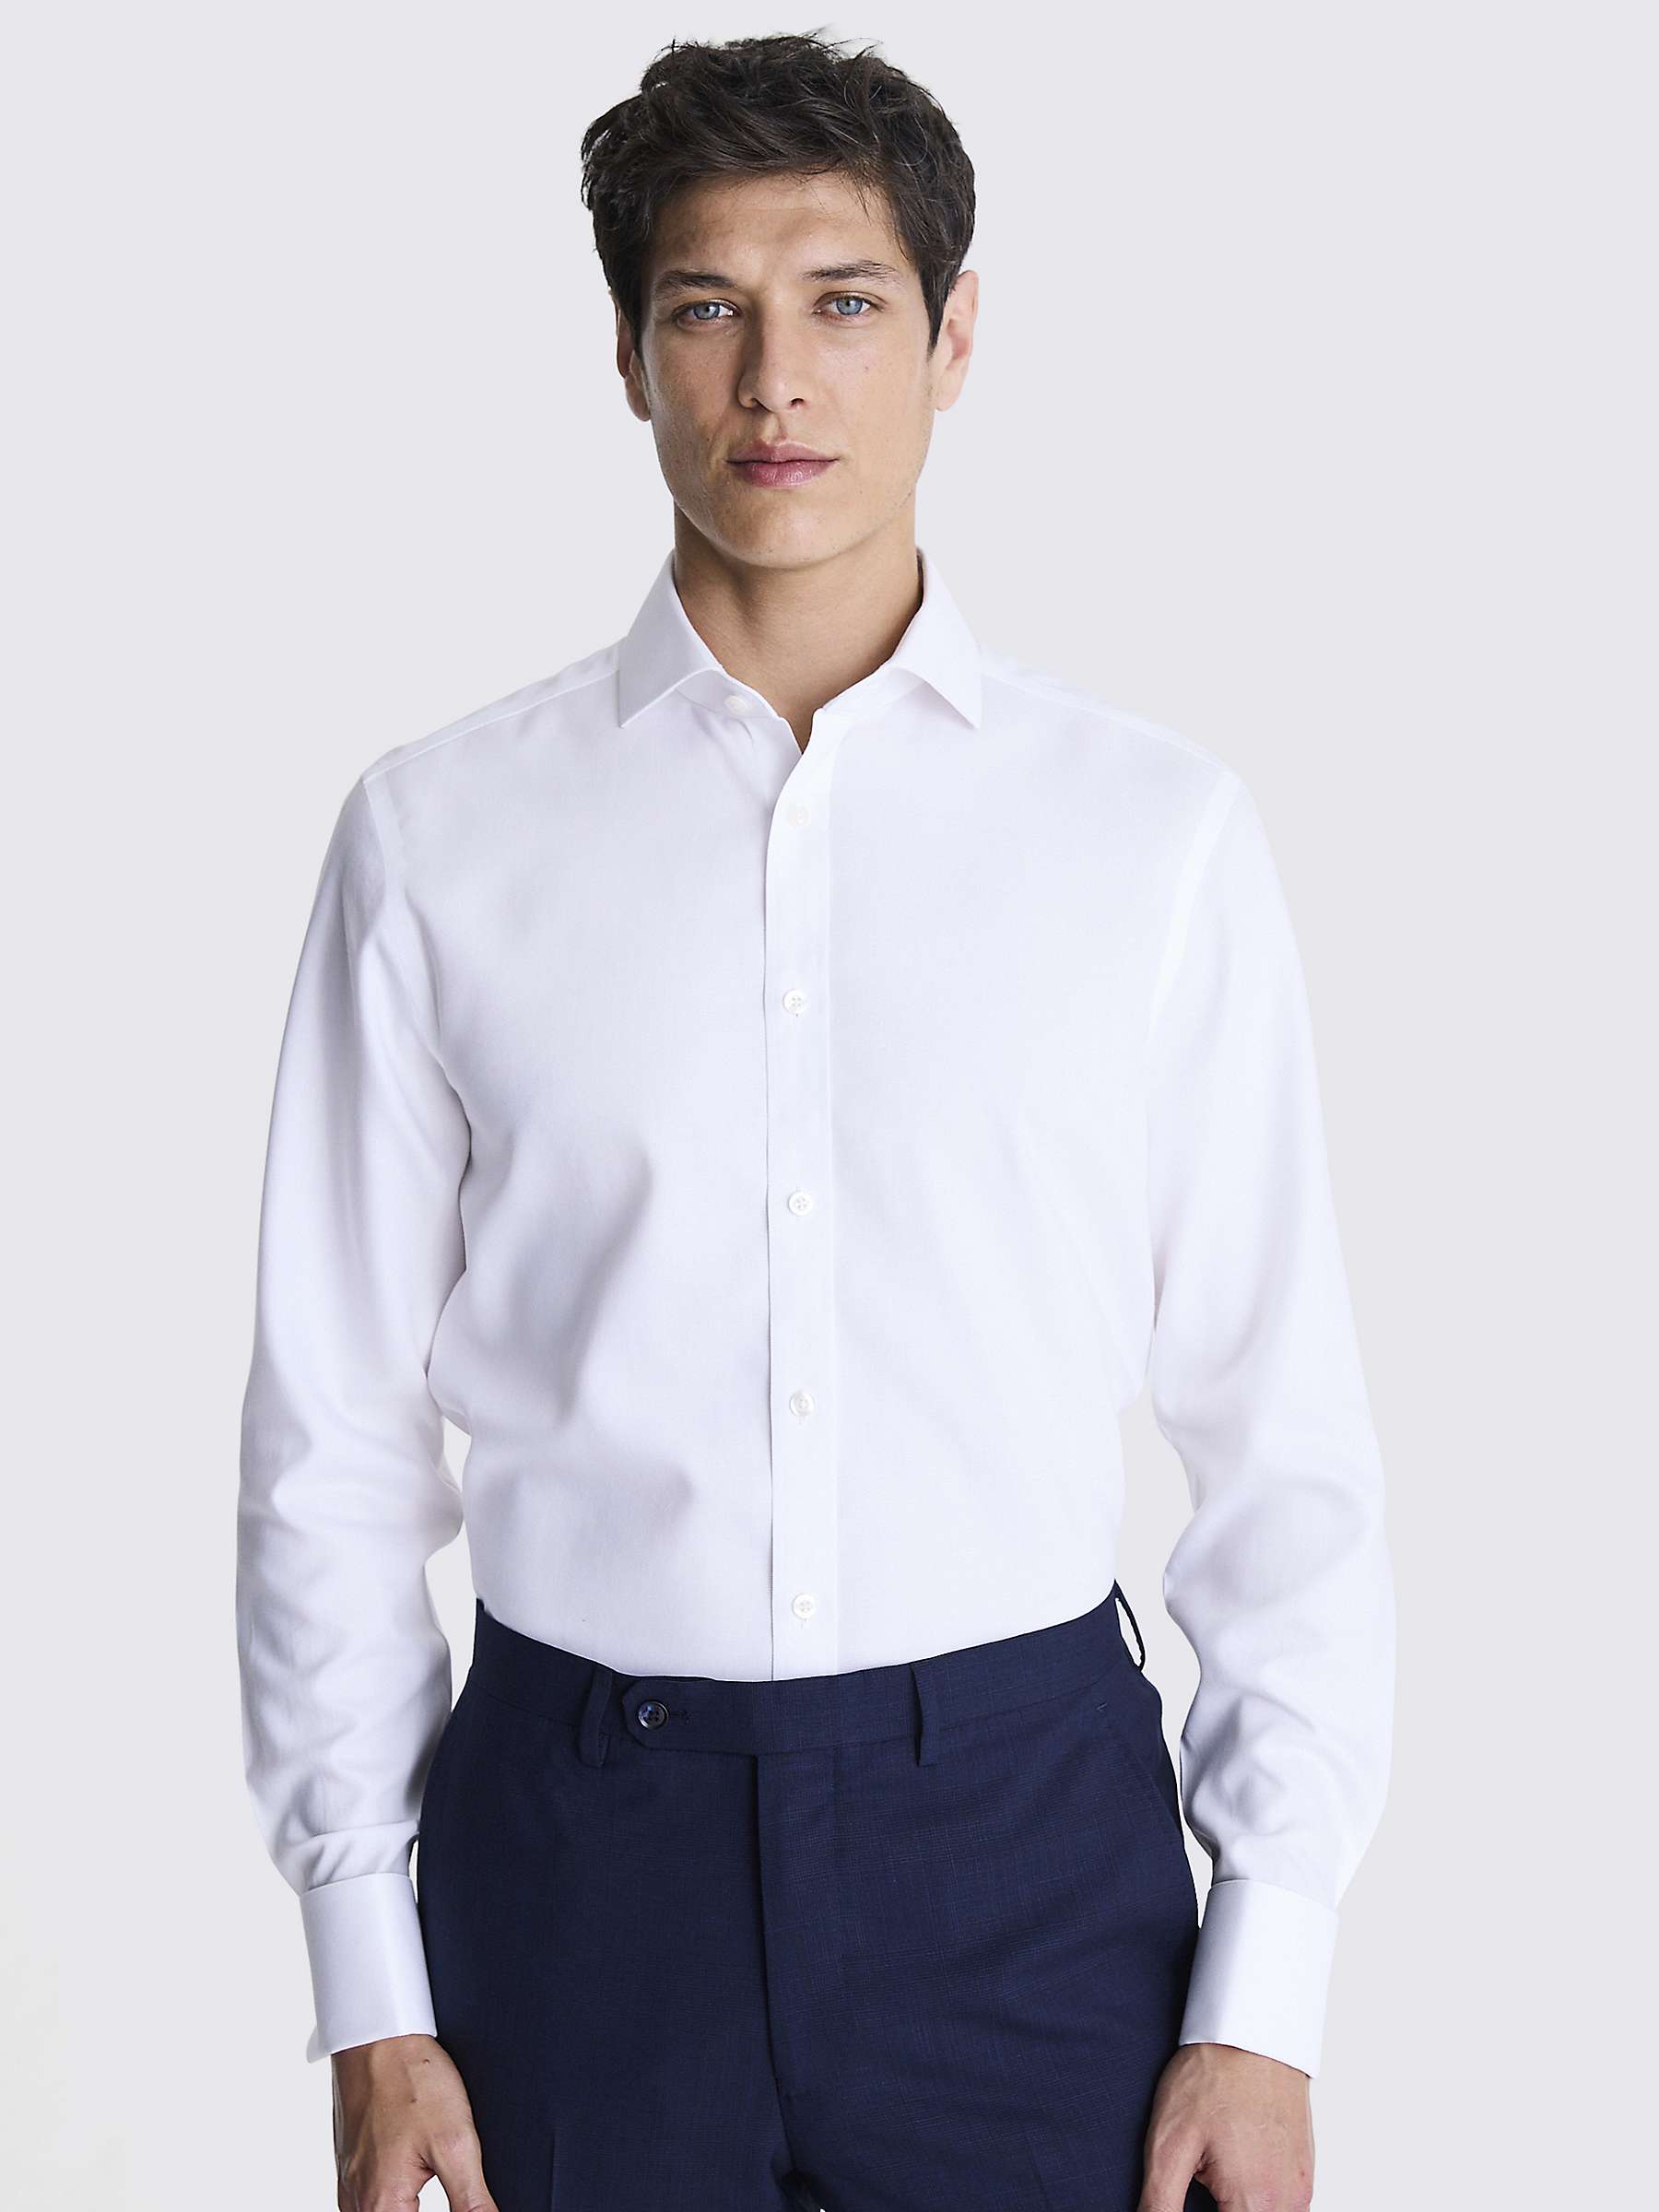 Buy Moss Tailored Fit Royal Oxford Double Cuff Non-Iron Shirt, White Online at johnlewis.com